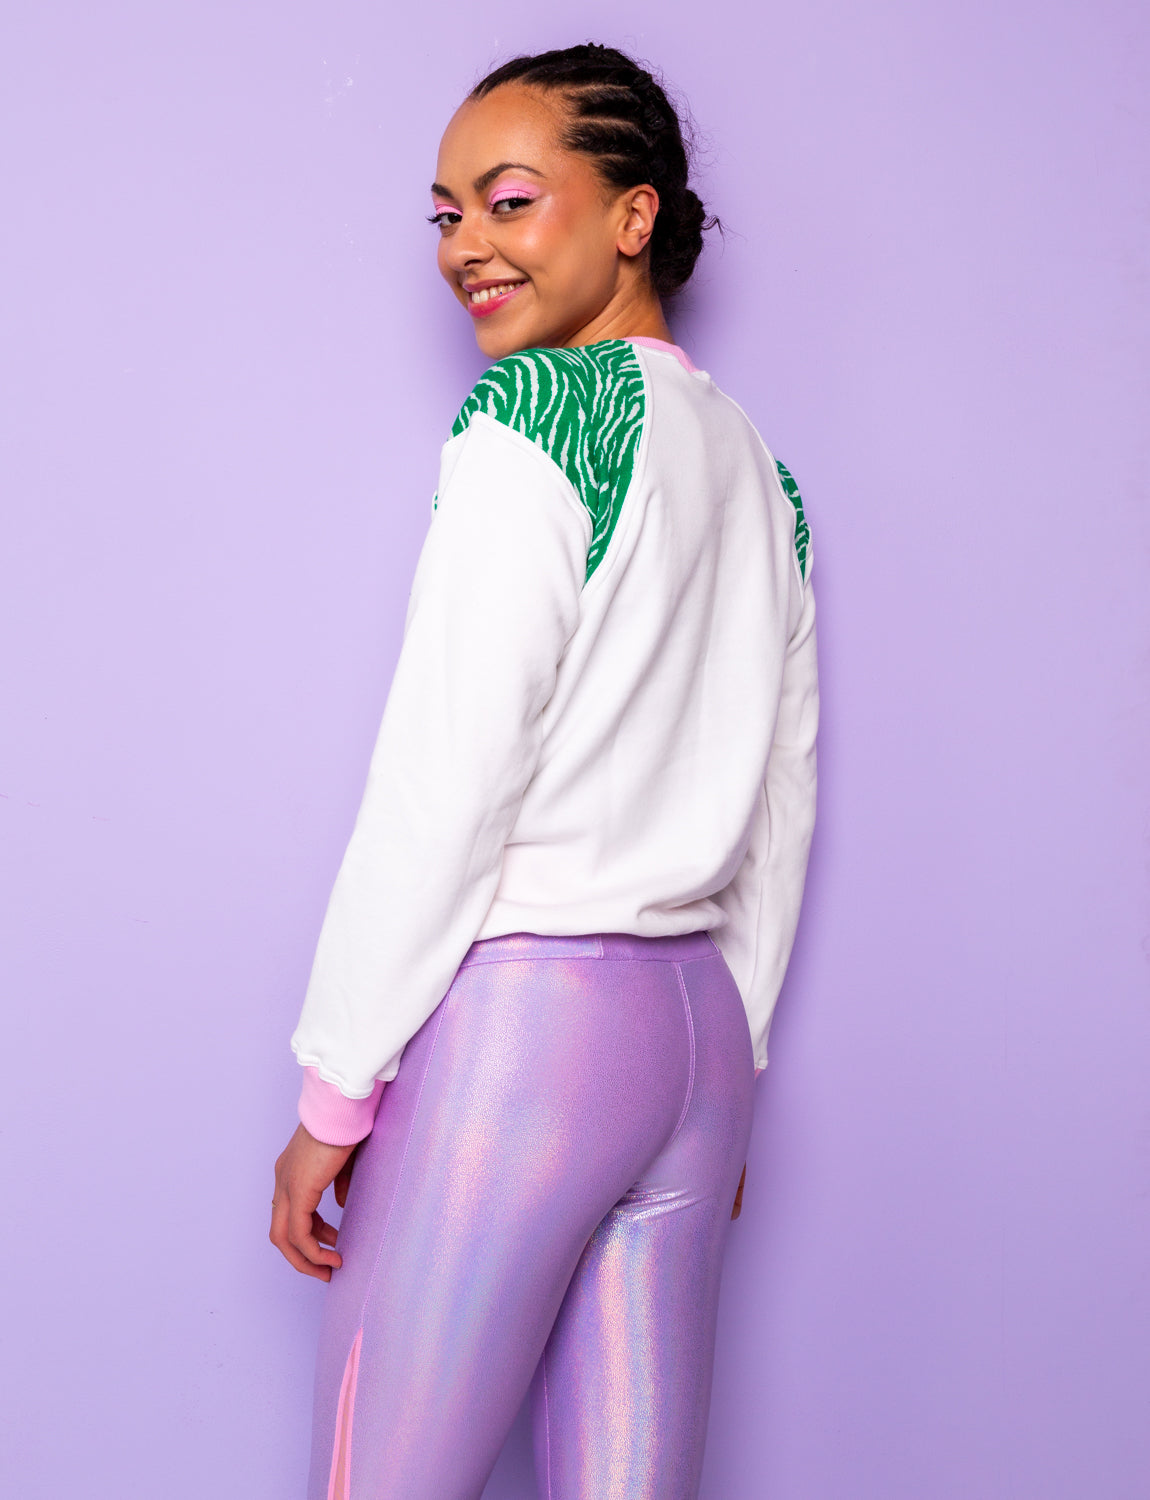 woman wearing a white sweatshirt with green zebra print shoulders tucked under at the hips with shiny lilac leggings